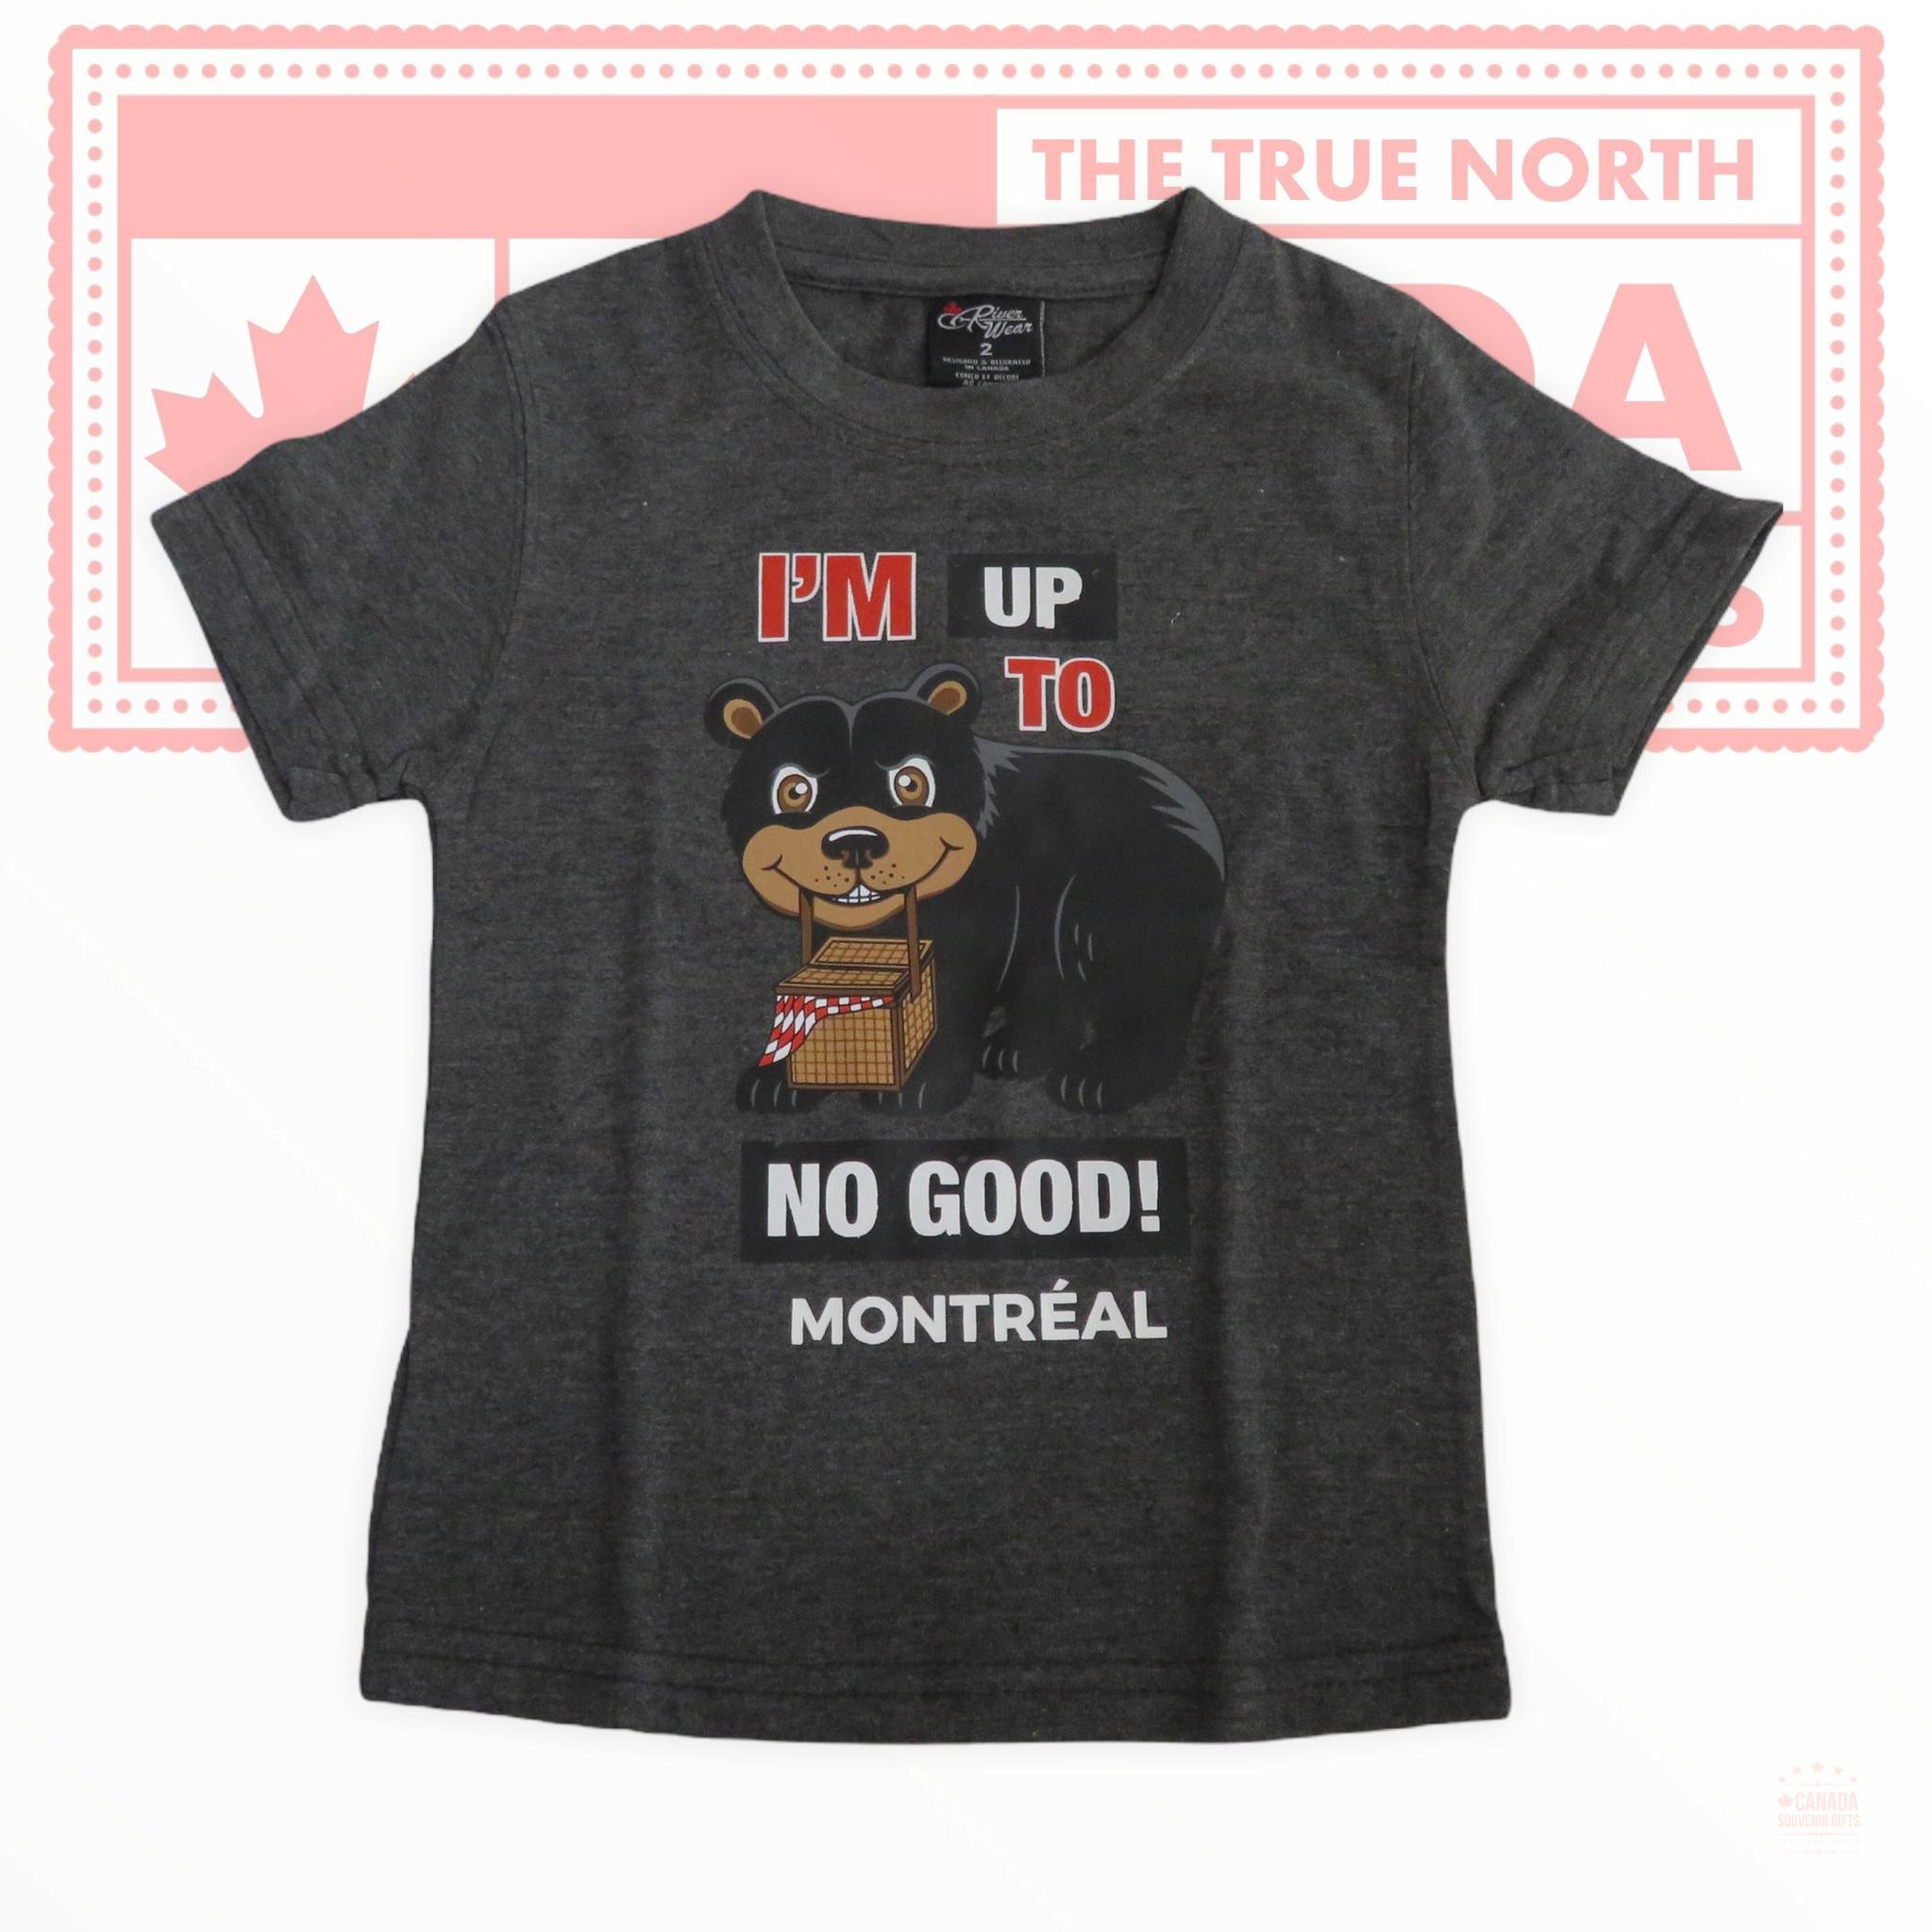 Teddy Bear T-Shirt I am up to no good. Montreal Vintage Short Sleeve Top for kids age 2-6 Years Old